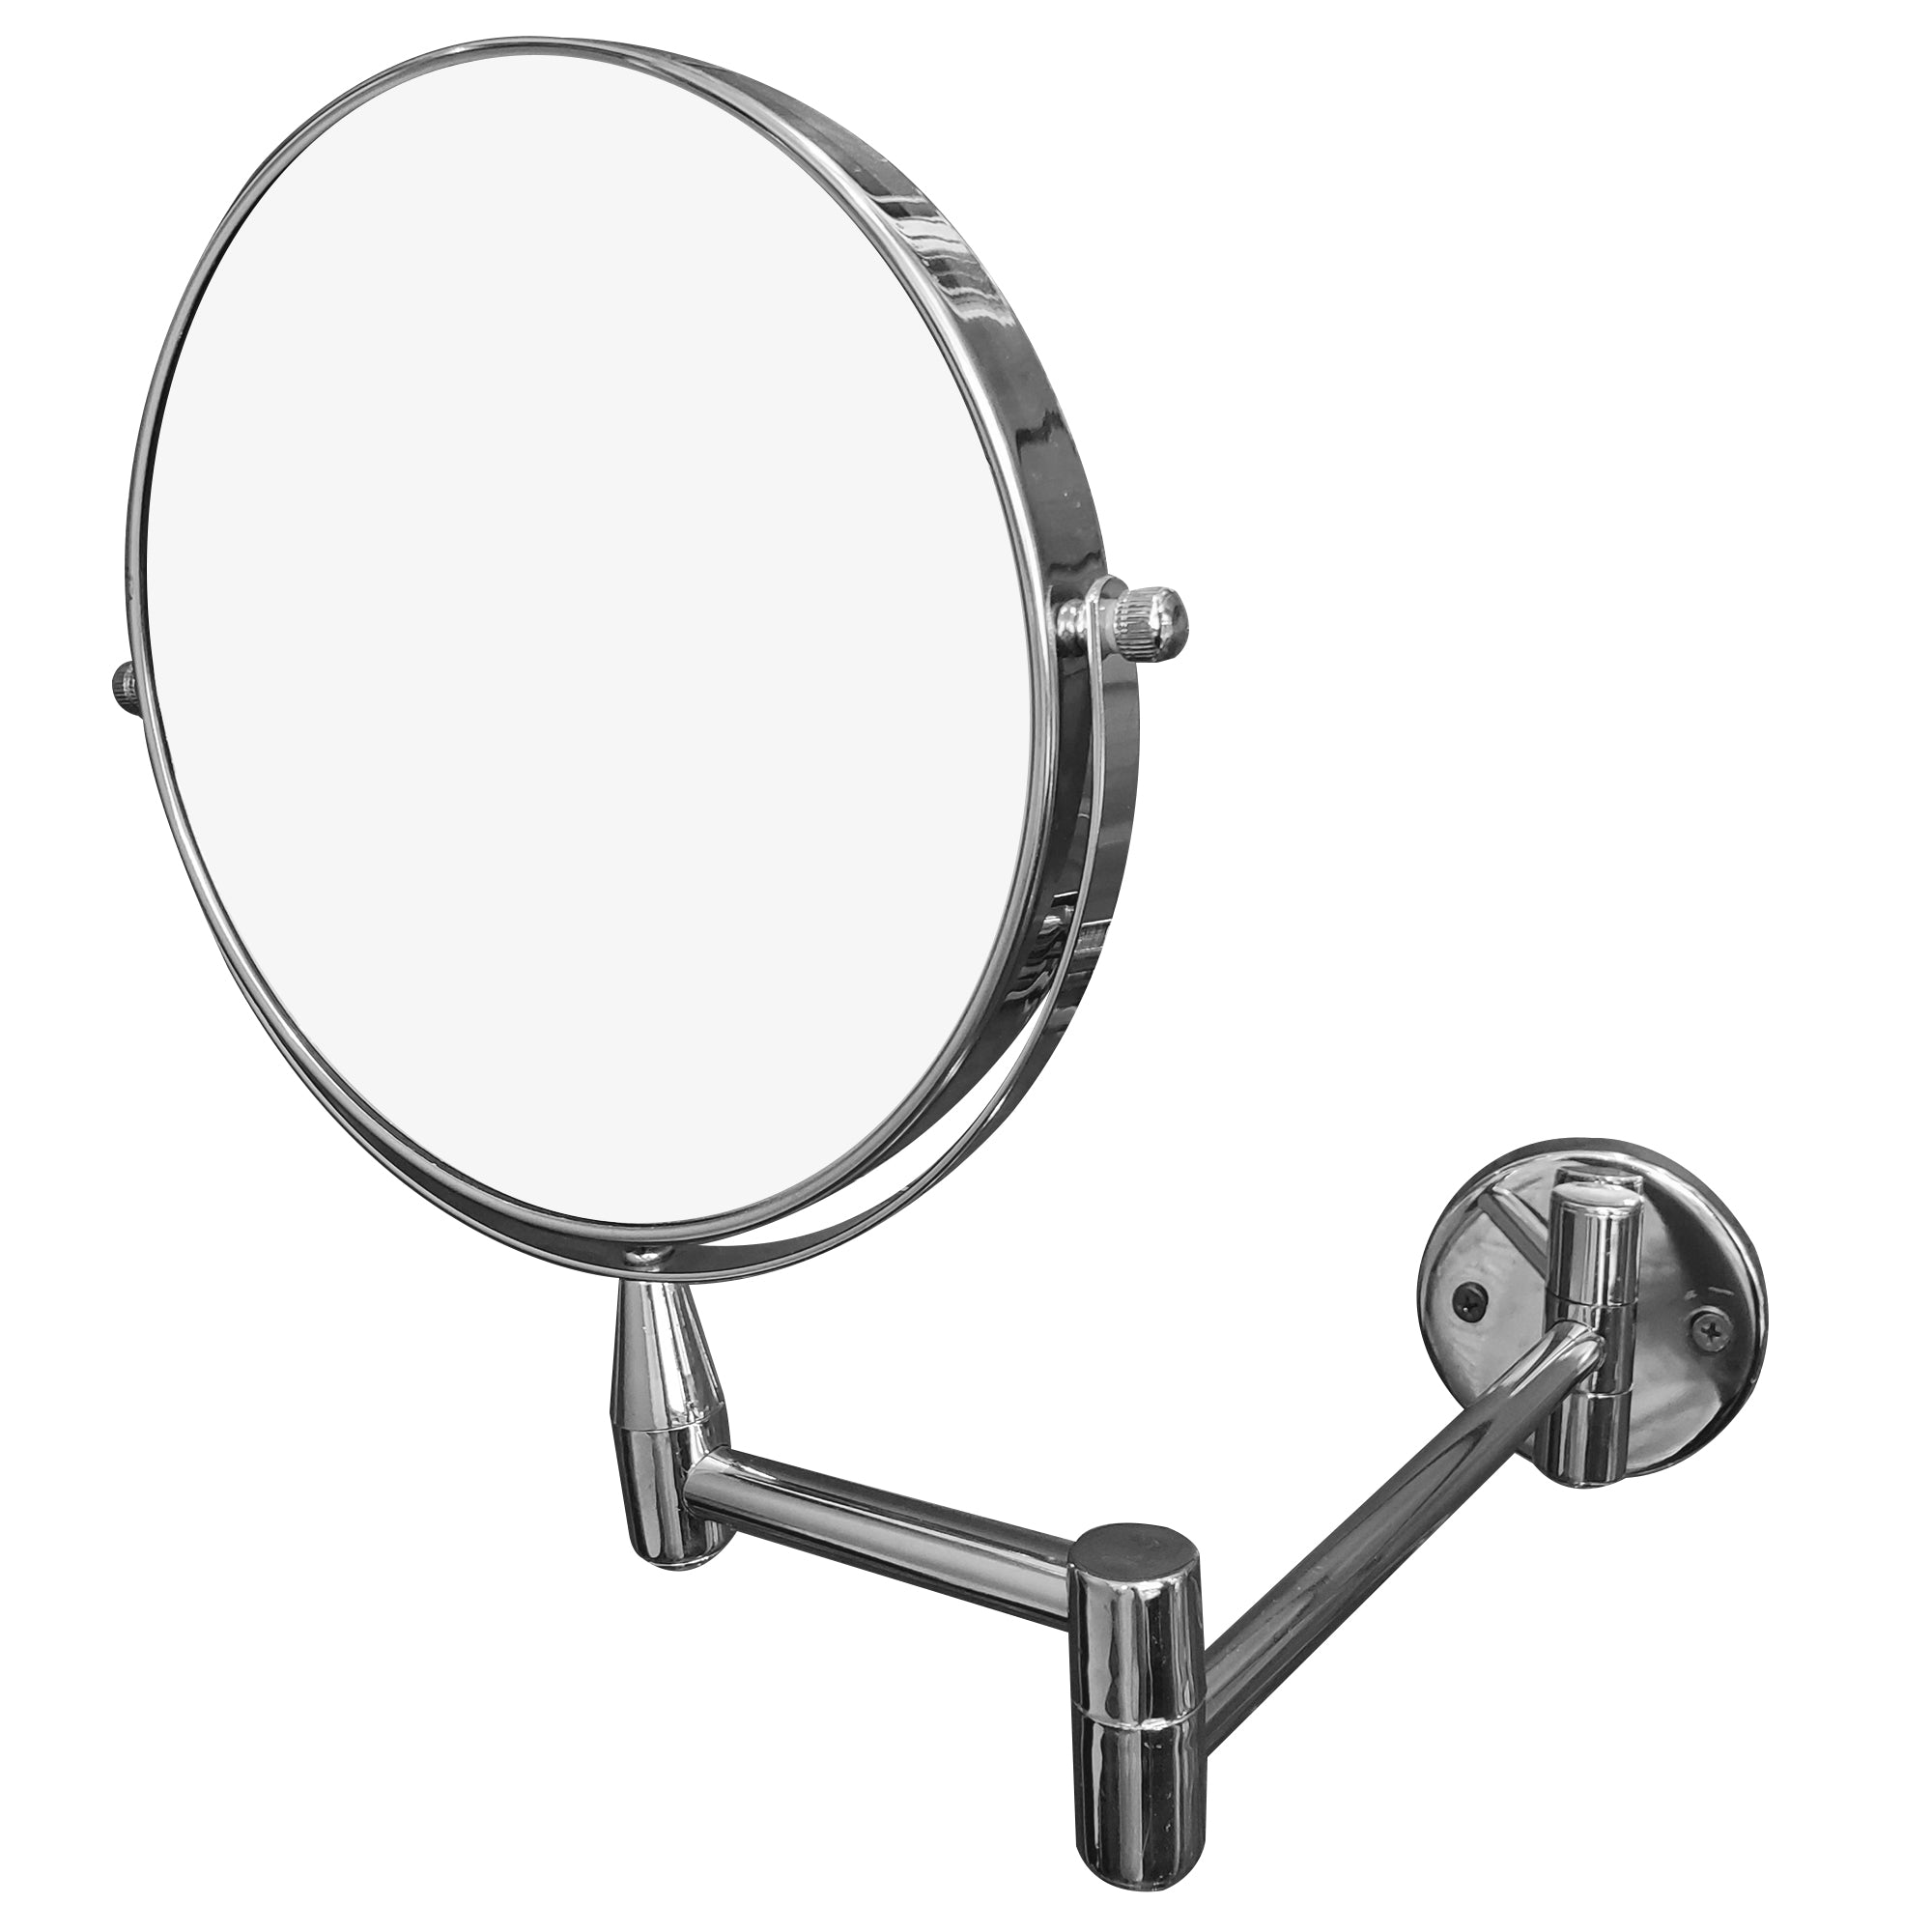 Extendable Swivel Arm Wall Mounted Mirror, 7X Magnification Chrome Finish (M880)